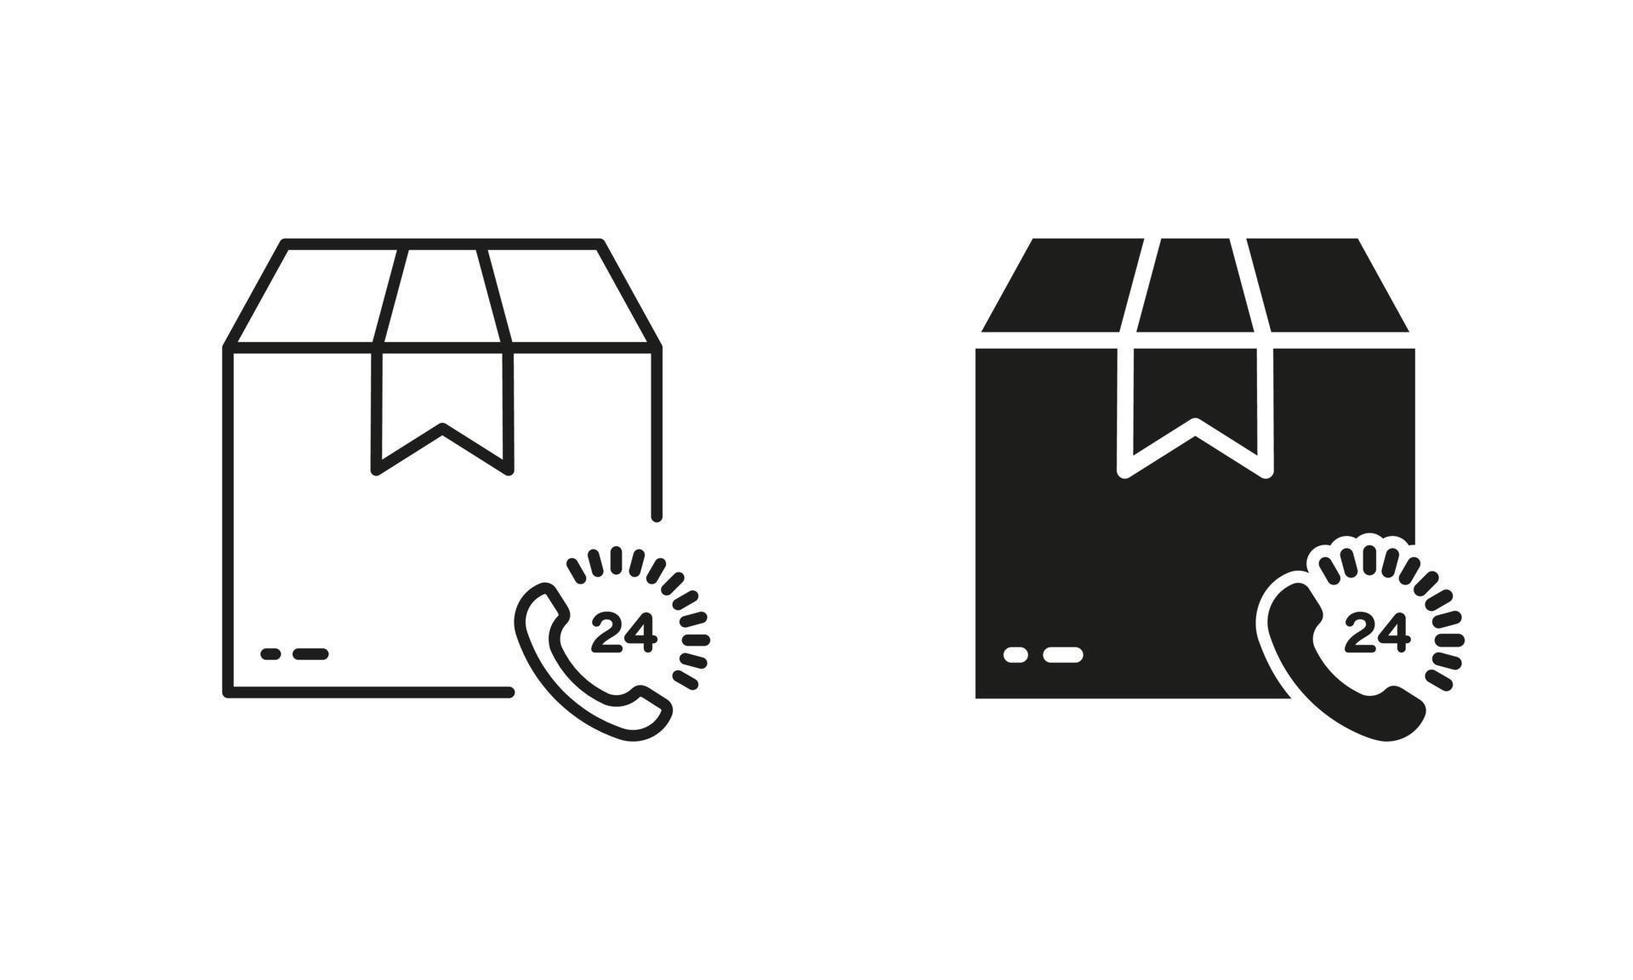 Shipping Parcel Box Around the Clock Silhouette and Line Icon Set. Fast Delivery Service 24 Hours 7 Days Pictogram. Transportation Order 24-7 Sign. Editable Stroke. Isolated Vector Illustration.